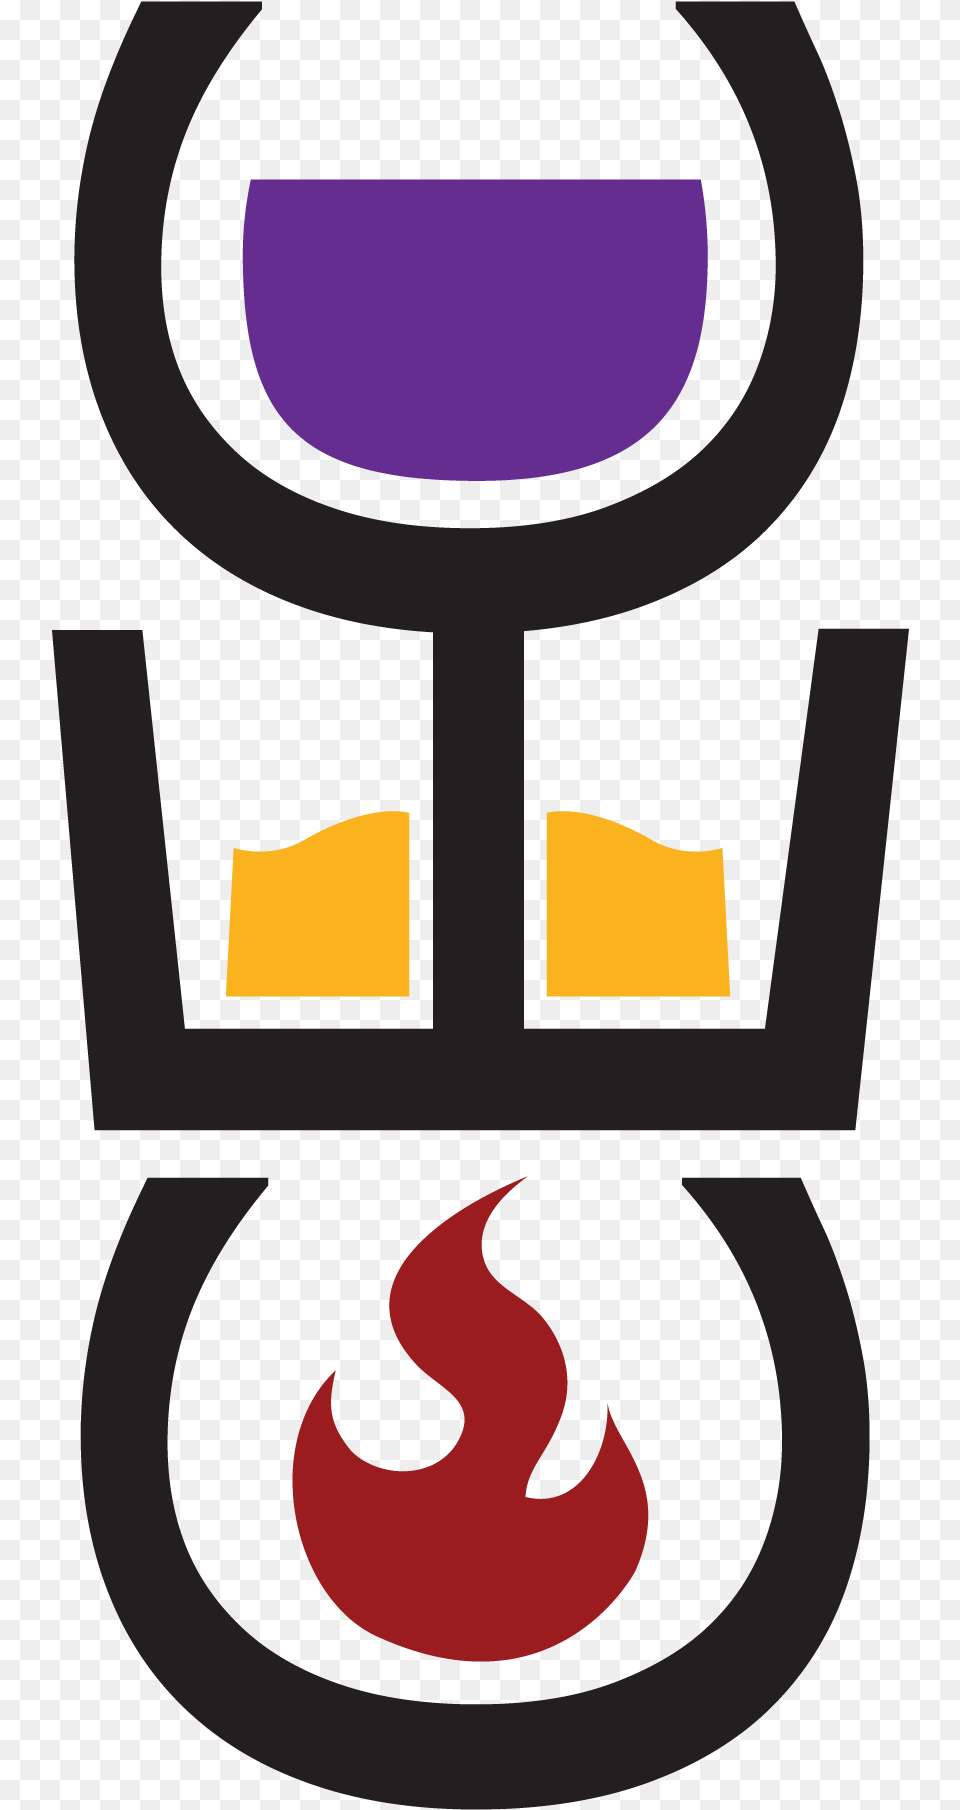 Church Of The Resurrection Anglican Symbols, Light Png Image